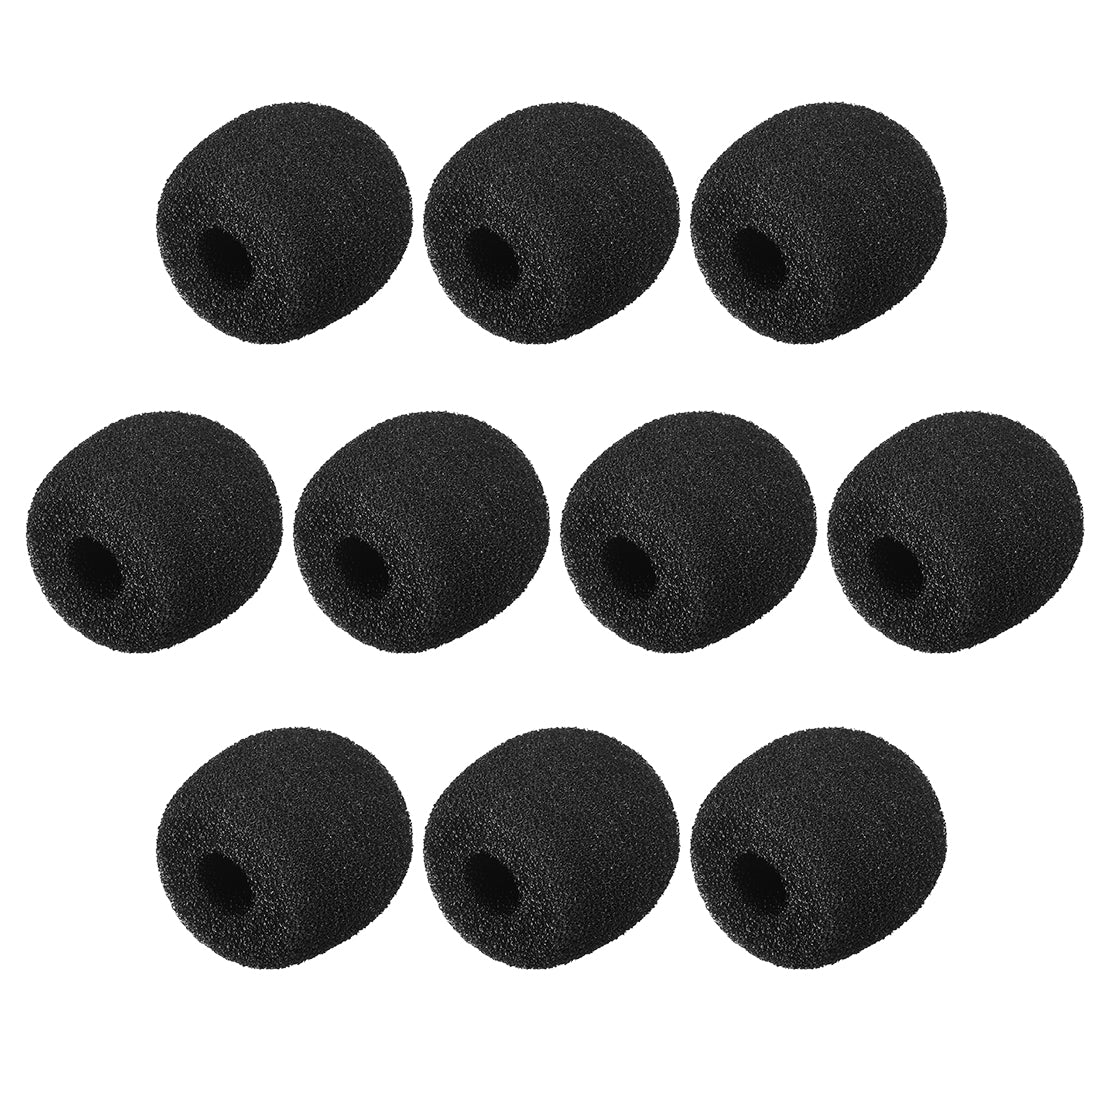 uxcell Uxcell 10PCS Foam Mic Cover Headset Microphone Windscreen Shield Protection 26mm Length for Headset Lapel Lavalier